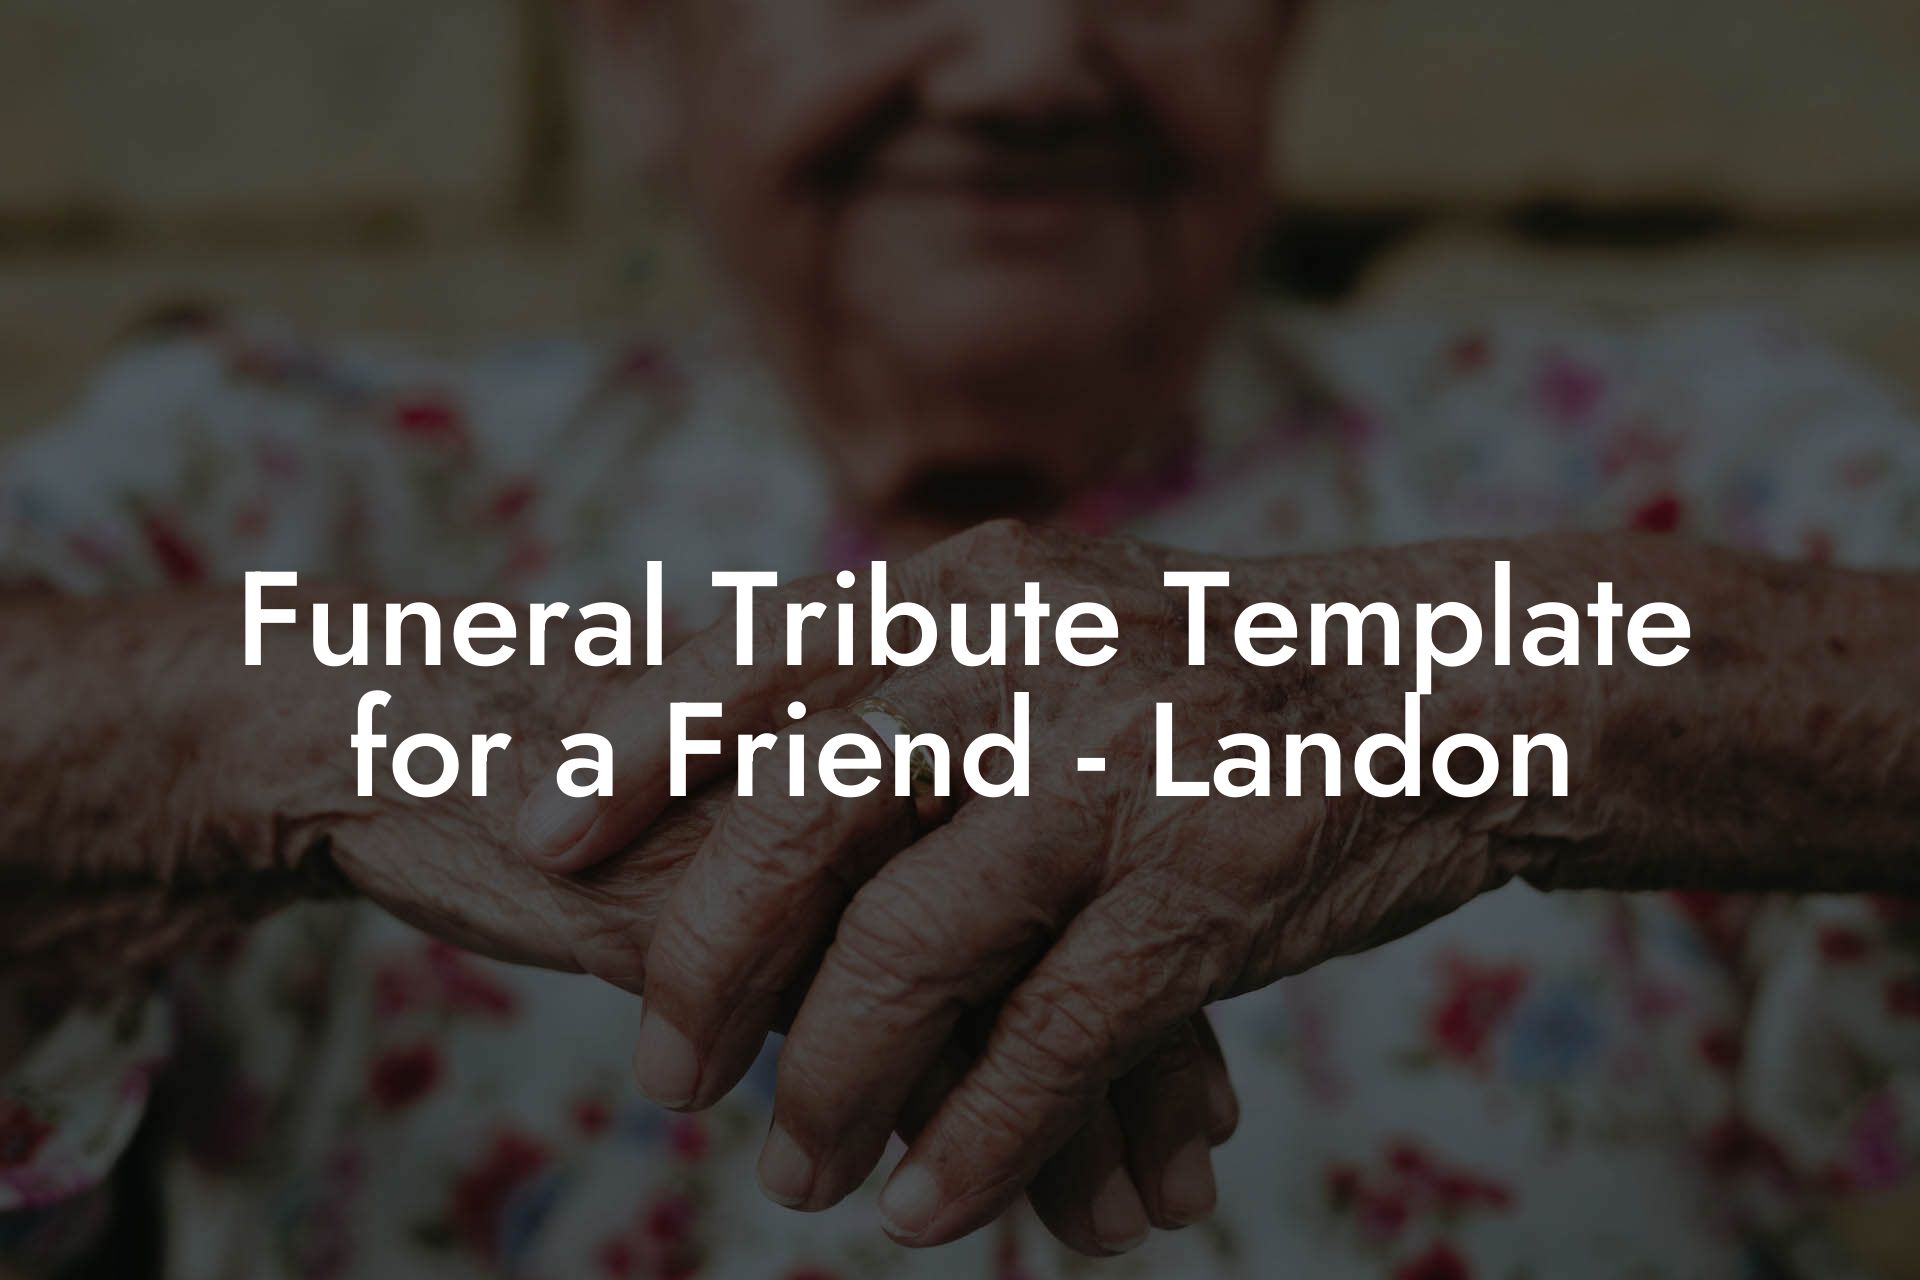 Funeral Tribute Template for a Friend - Landon